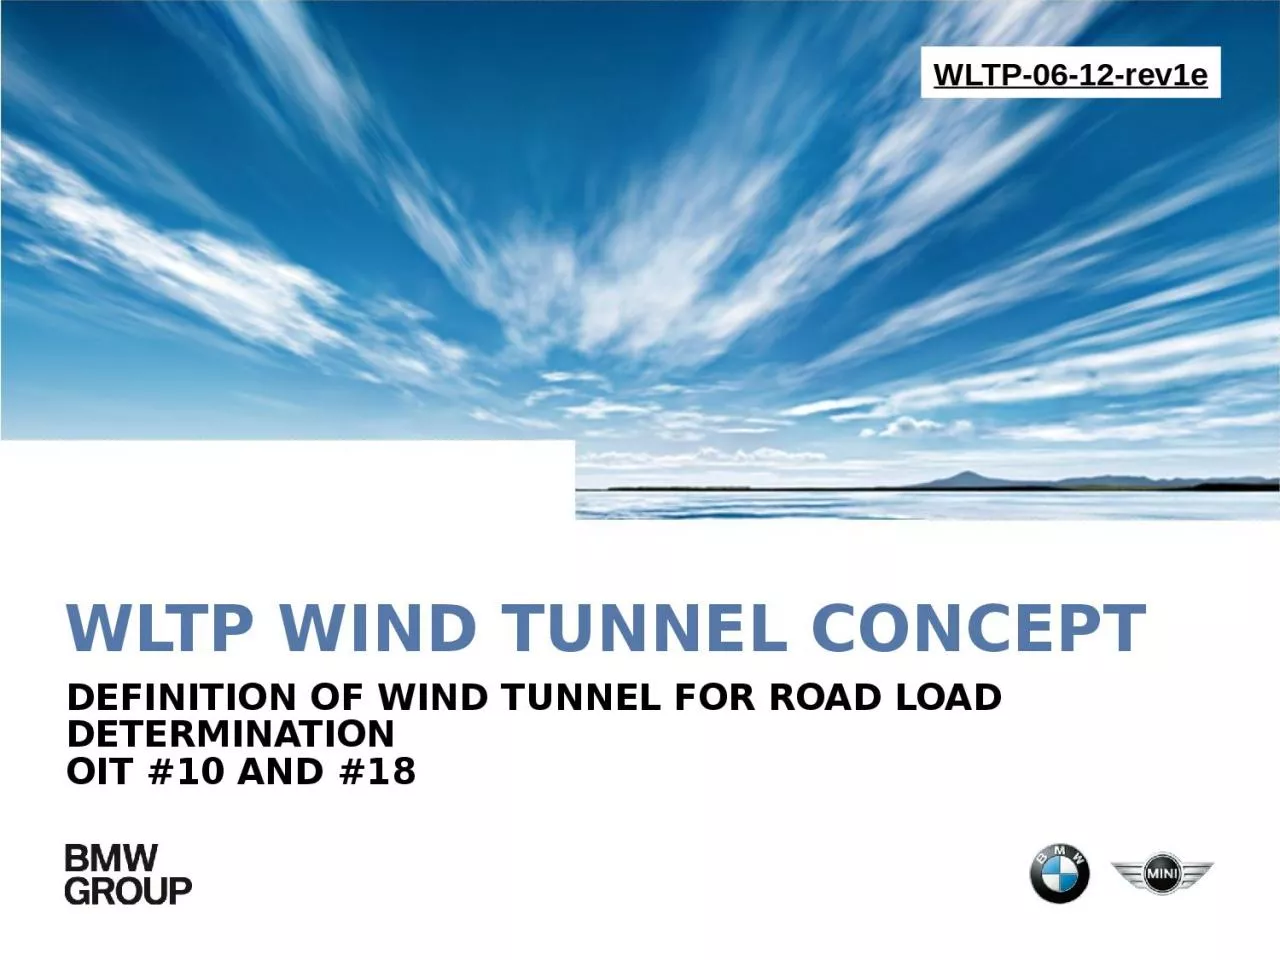 WLTP wind tunnel concept